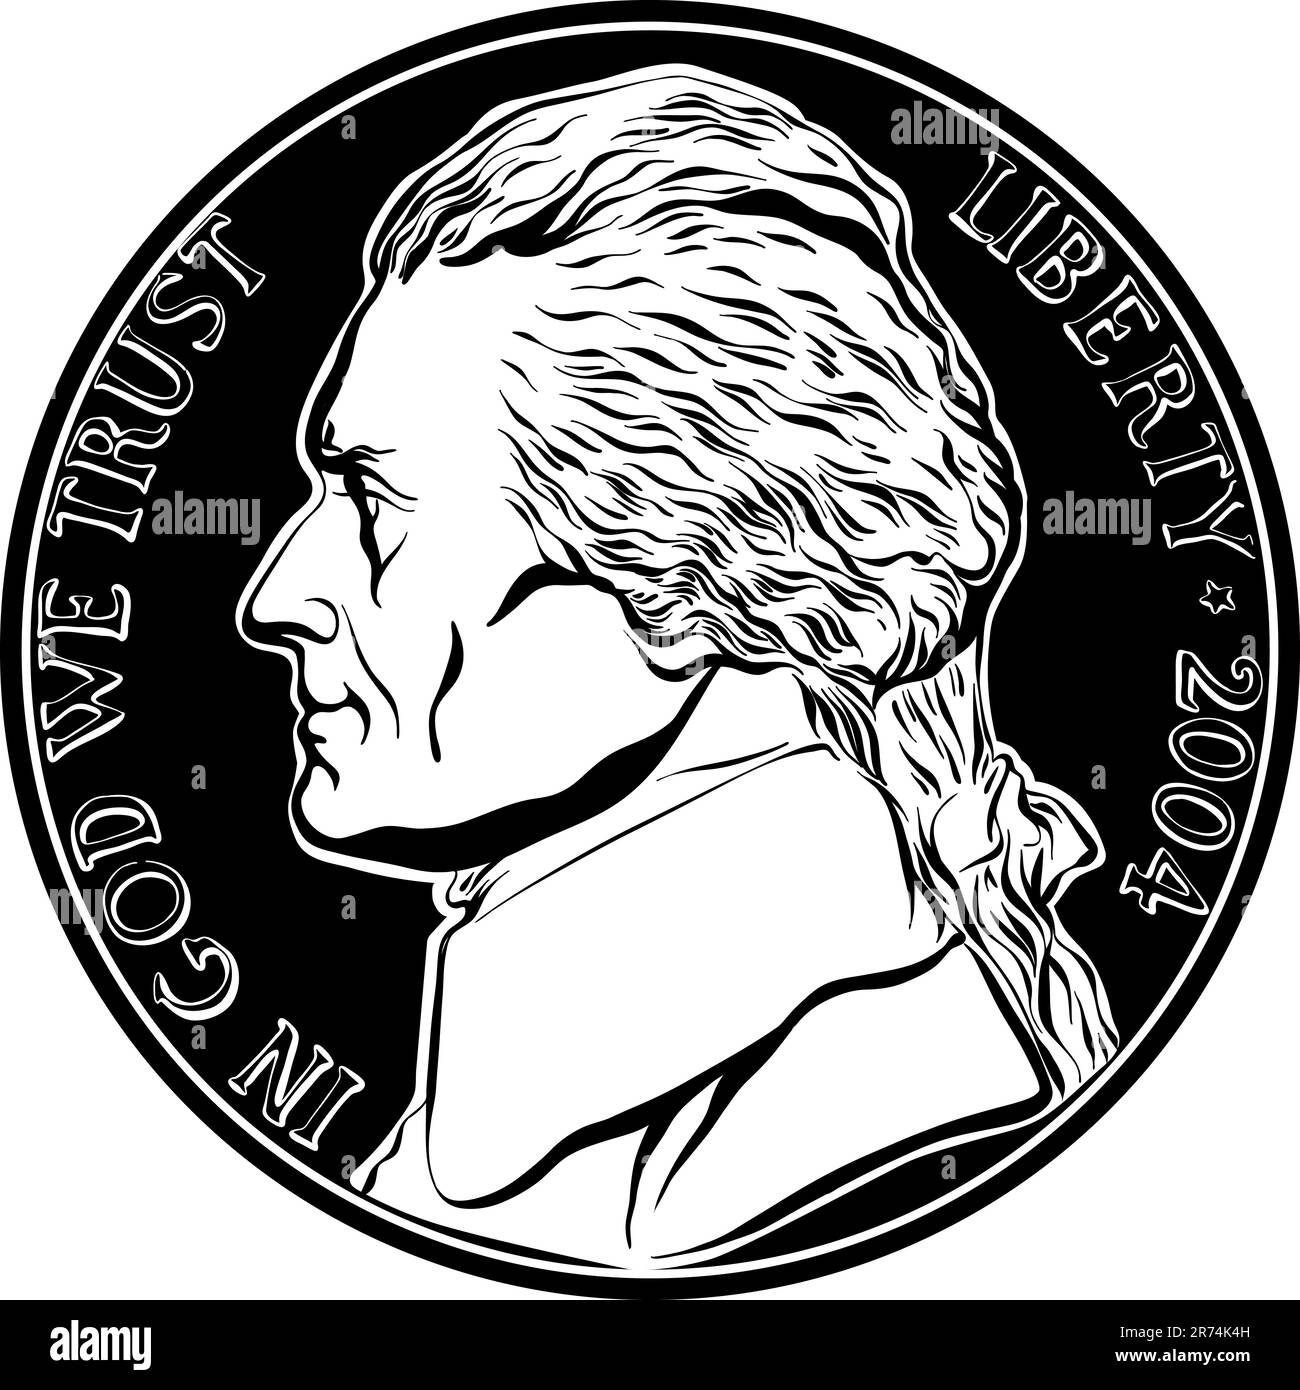 Jefferson nickel, American money, United States five-cent coin with Jefferson, third President of USA on obverse. Black and white image Stock Vector